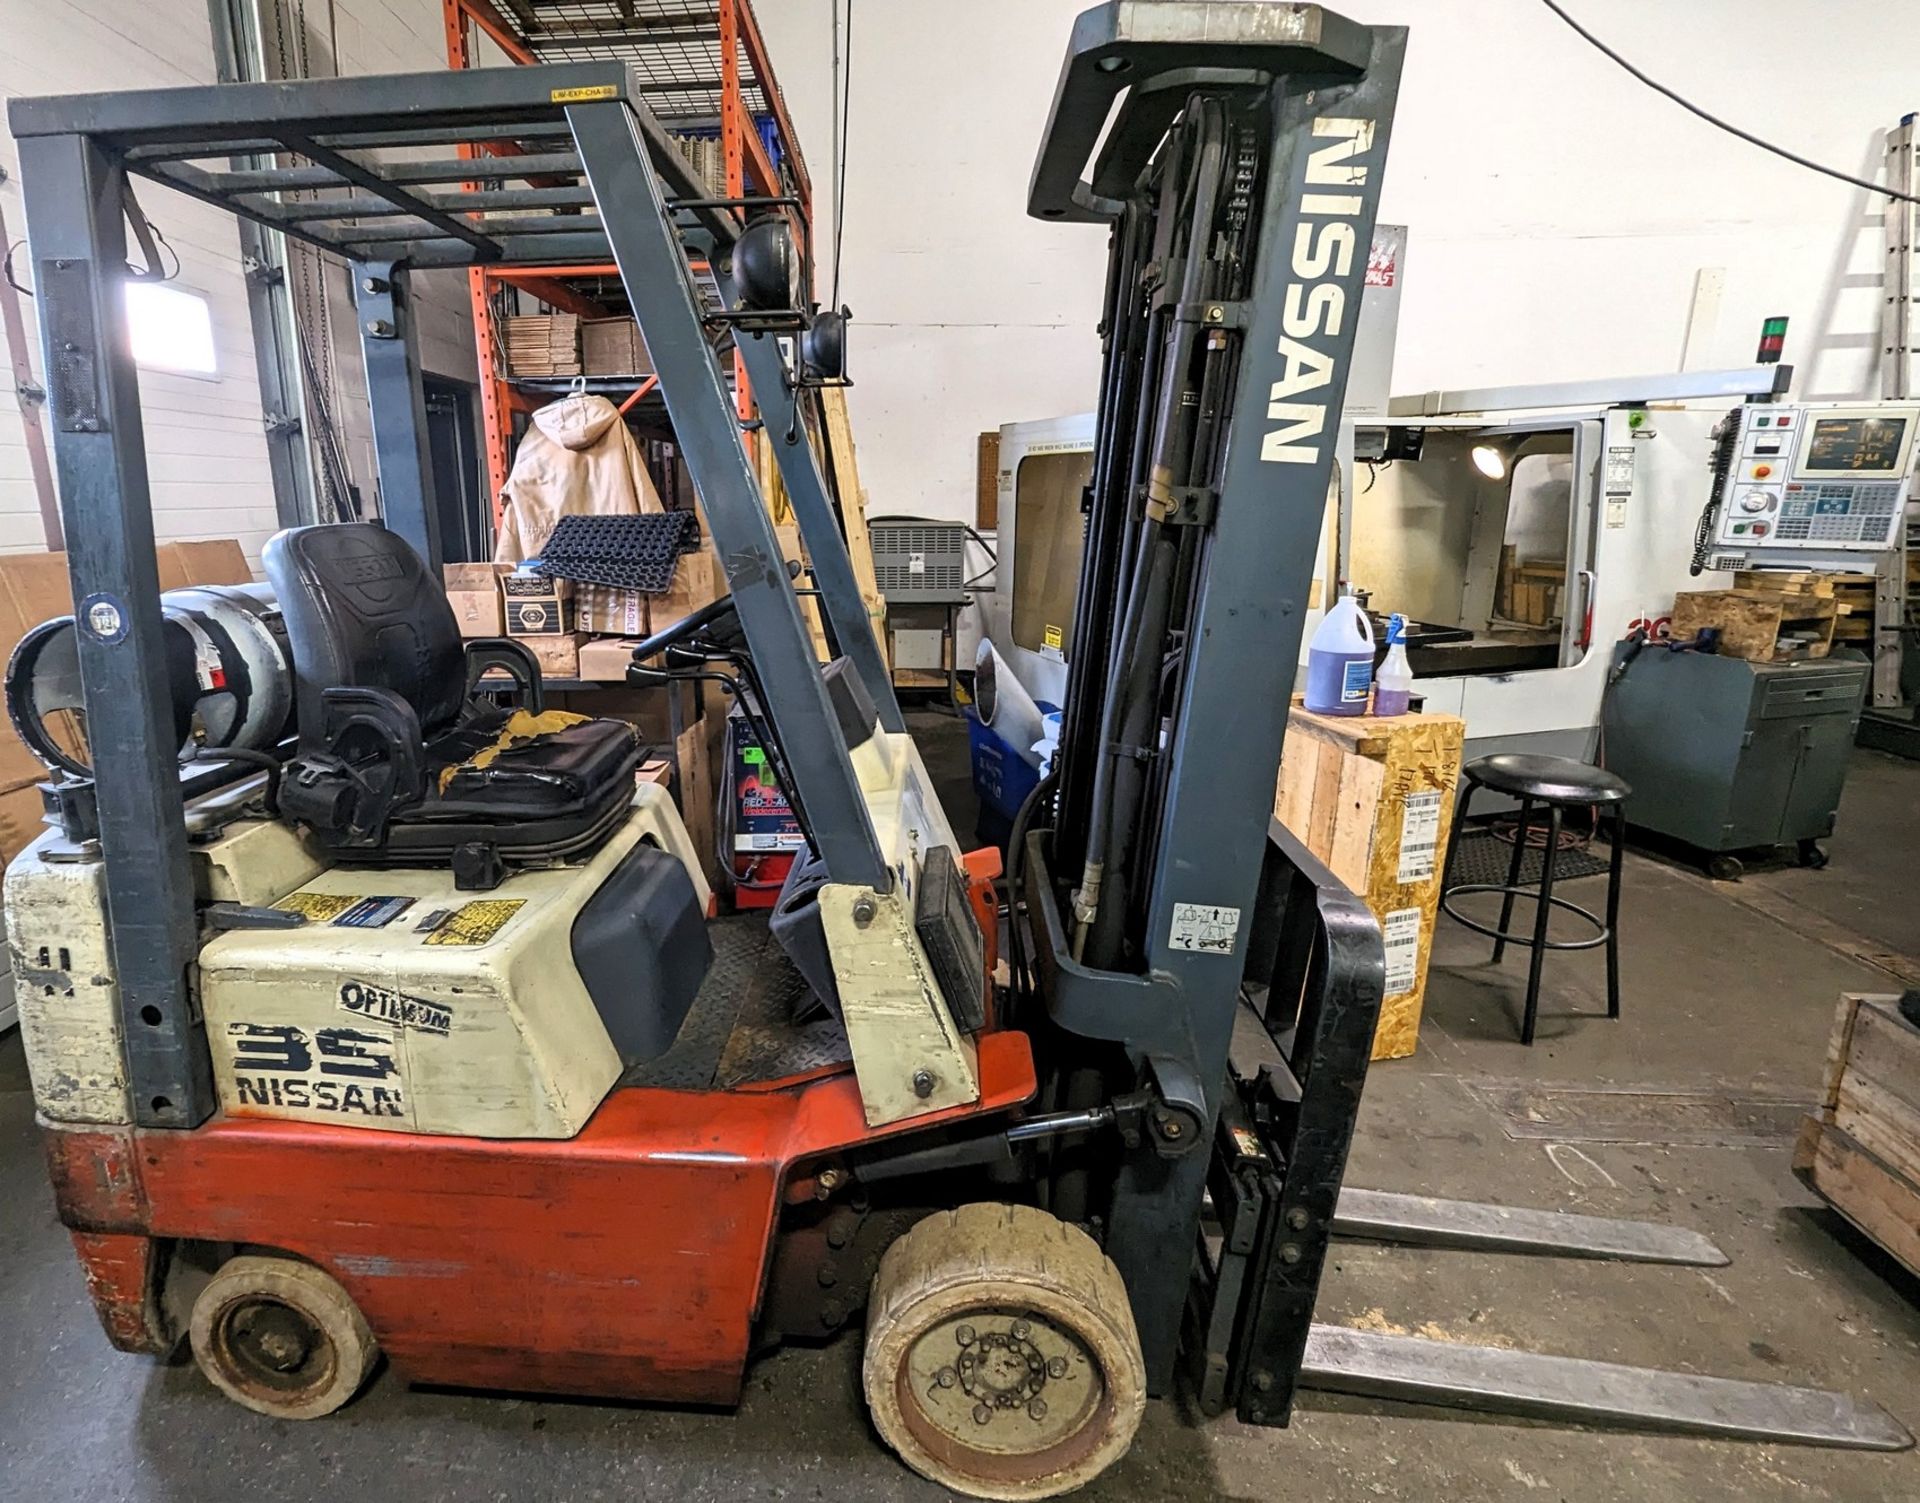 NISSAN CPJ01A18PV PROPANE FORKLIFT, 2,950LB CAP., 187” MAX LIFT, 3-STAGE MAST, SIDE SHIFT, APPROX.